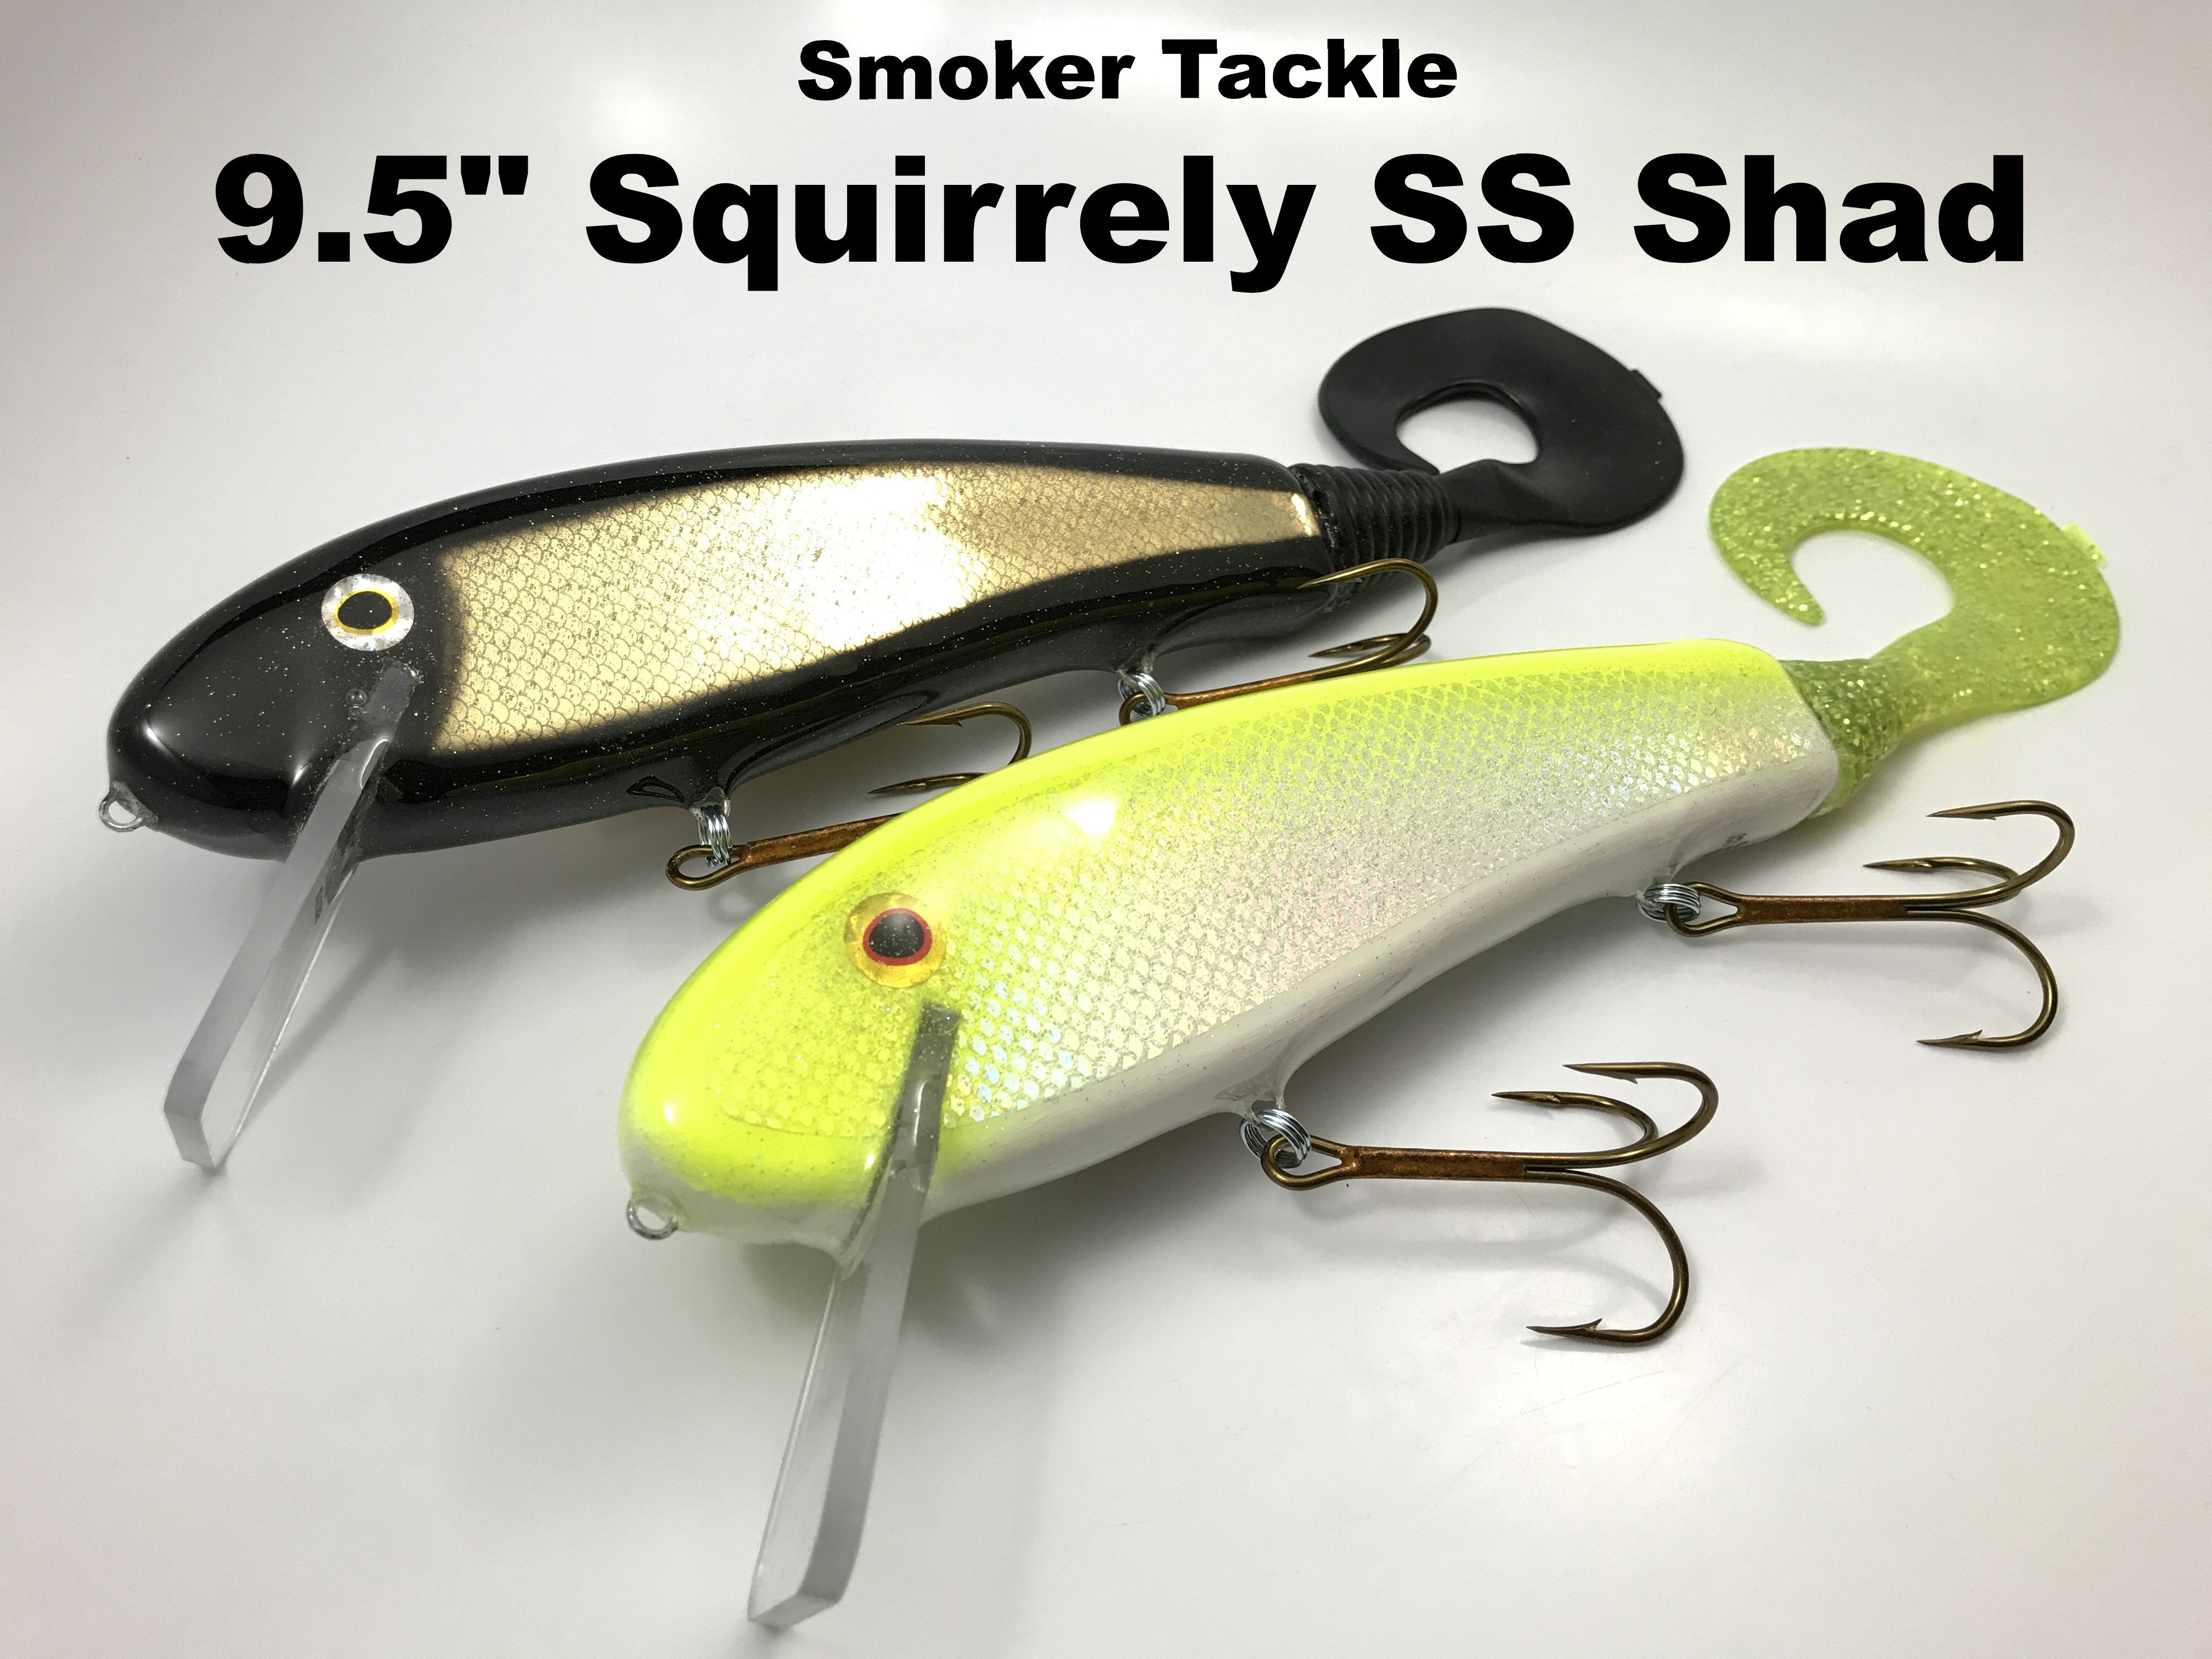 Smoker Tackle 9.5 Squirrely SS Shad